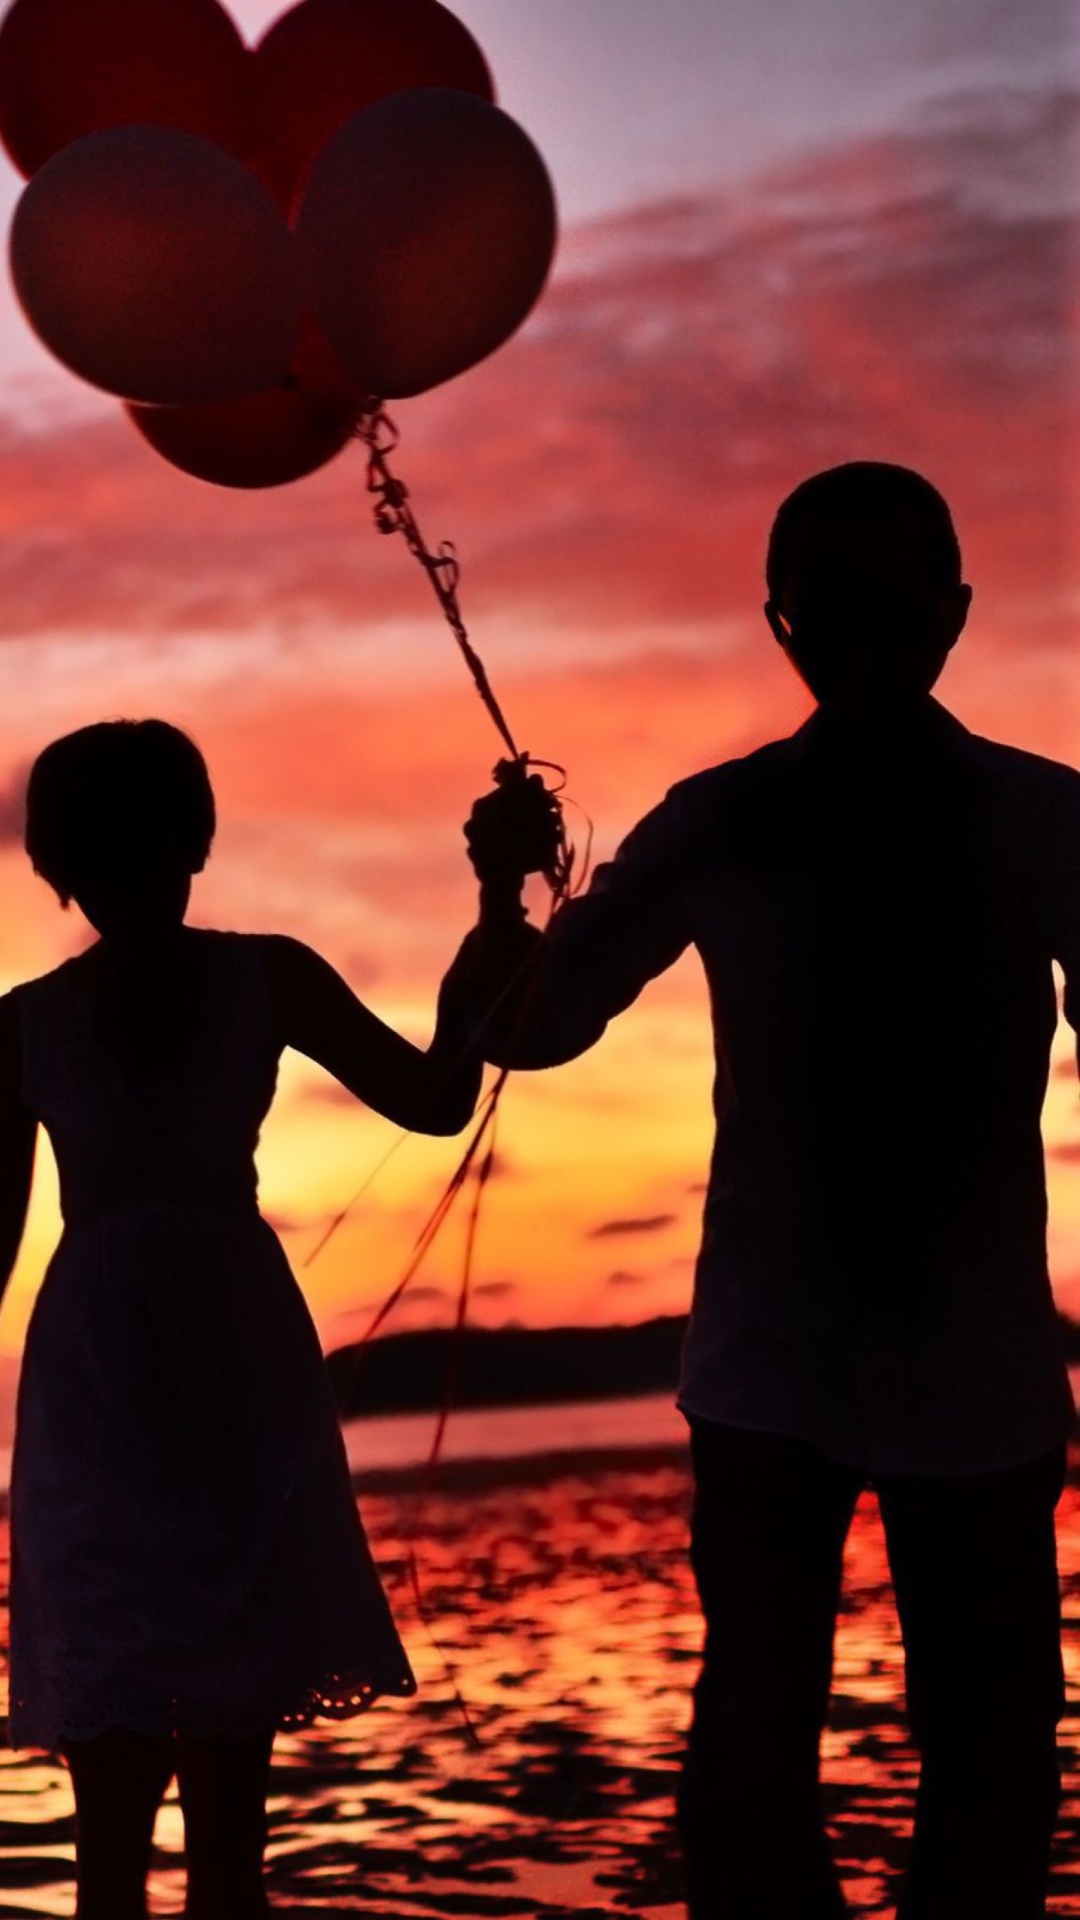 Couple With Balloons Silhouette At Sunset wallpaper 1080x1920